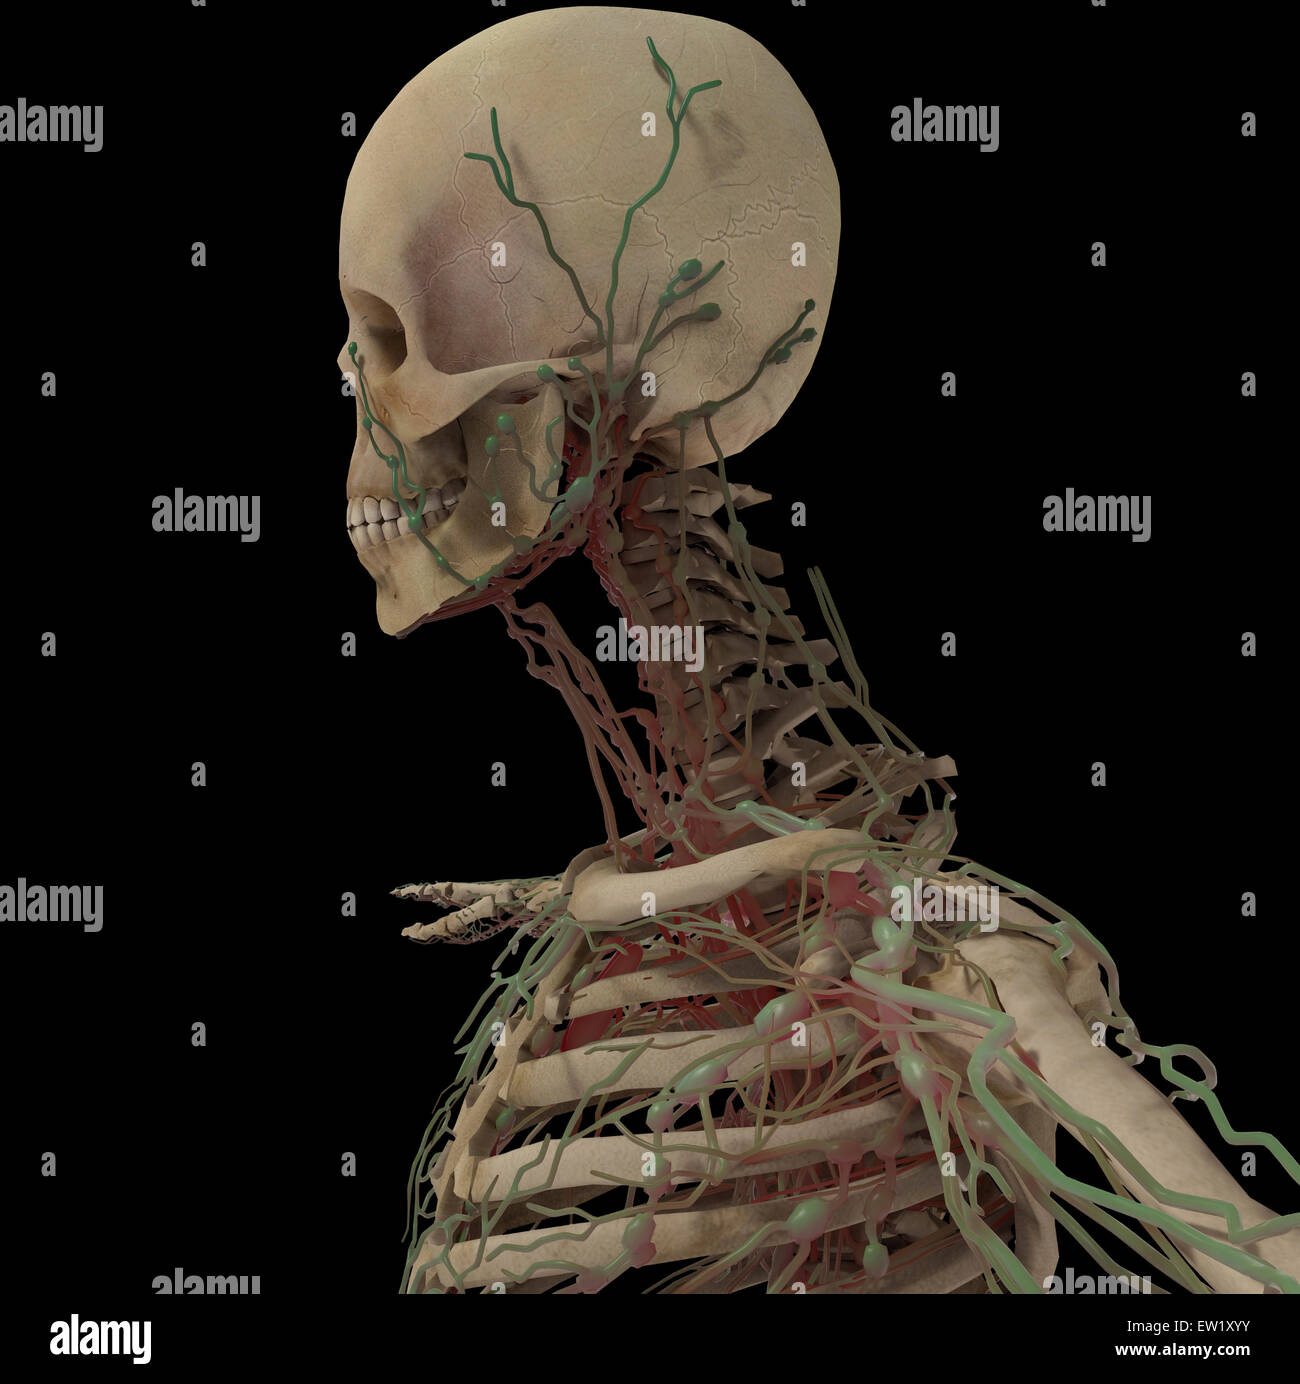 3D rendering of human skull with lymphatic system, side view. Stock Photo